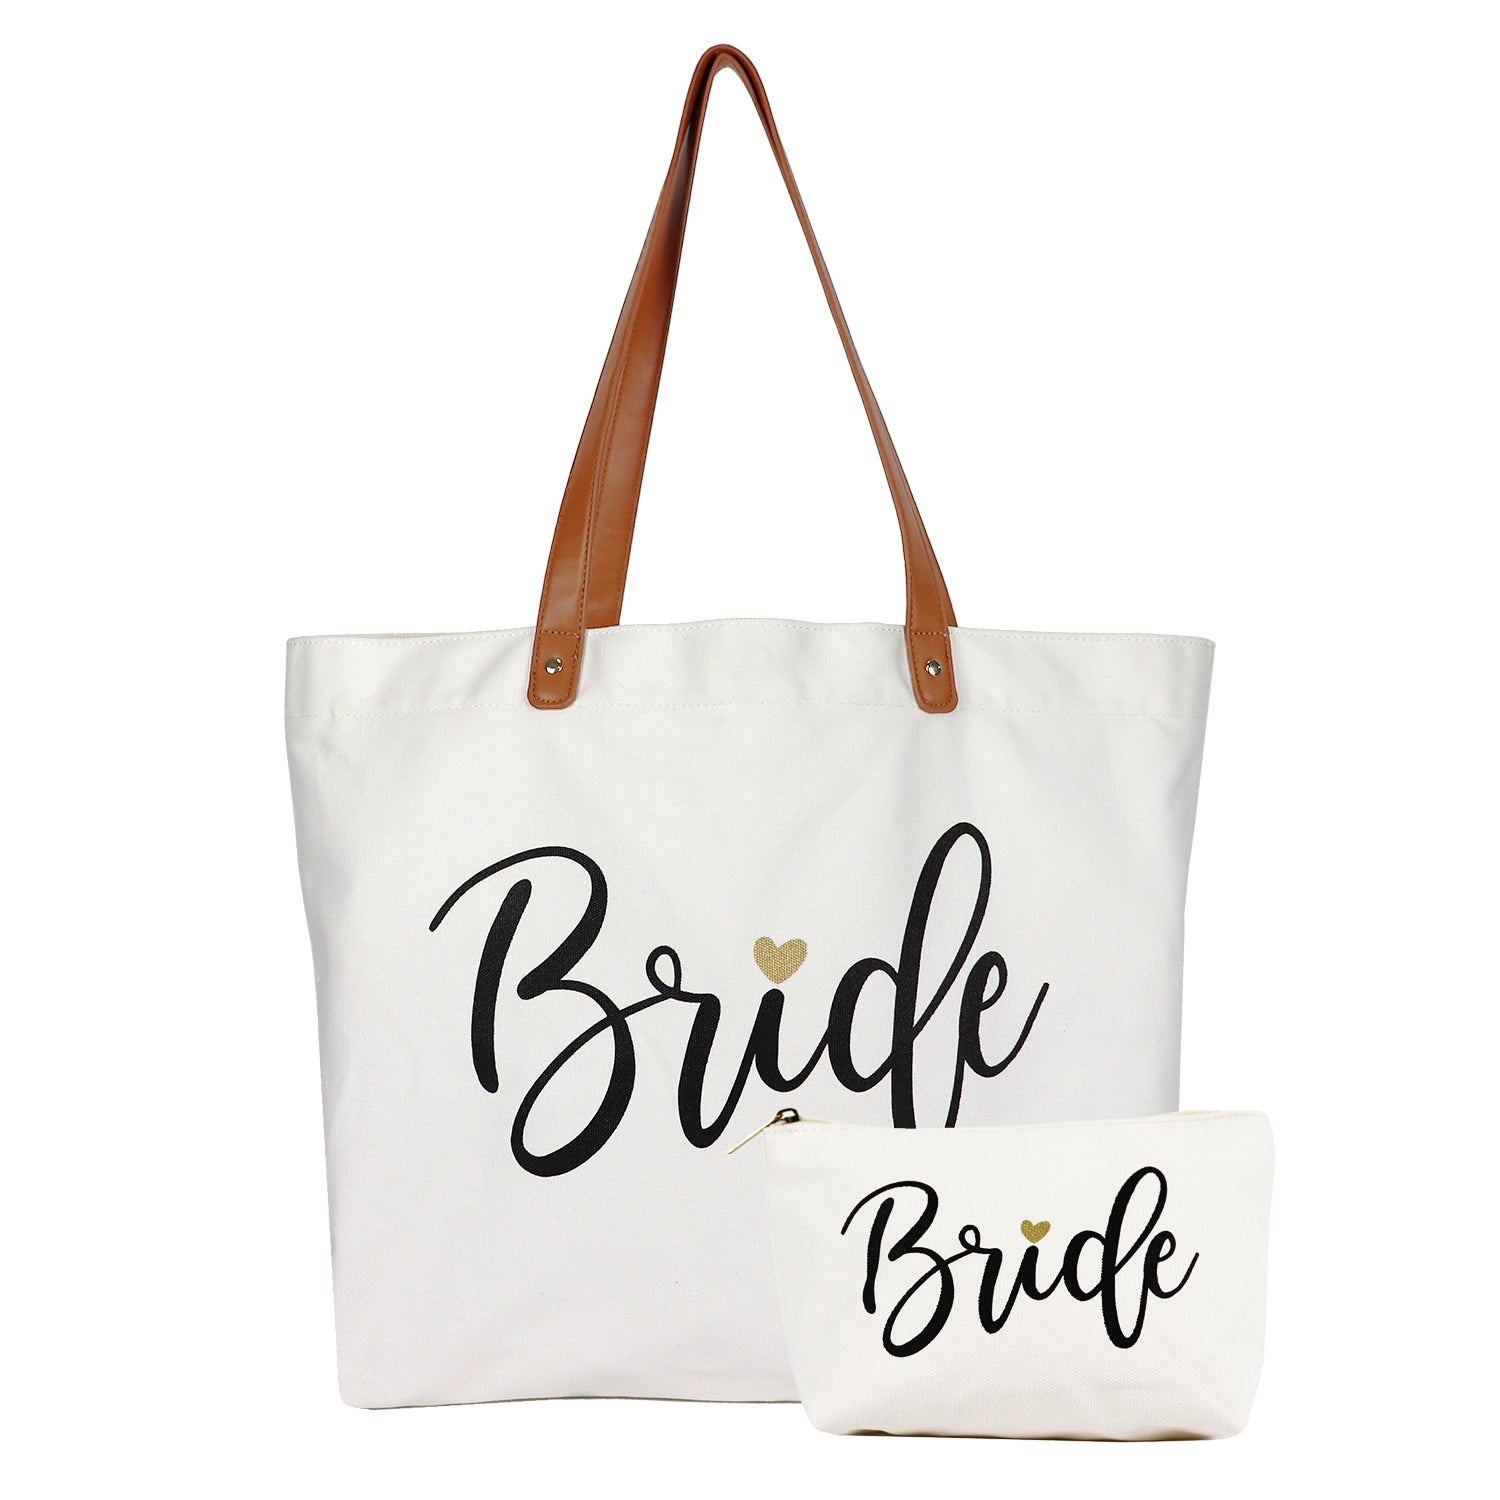  Sweetude 6 Pcs Mother of Bride and Groom Gift Set Includes  Canvas Tote Bag Cosmetic Makeup Bags and 20 oz Stainless Steel Travel  Tumbler for Mother of Bride/Groom Wedding Bridal Shower